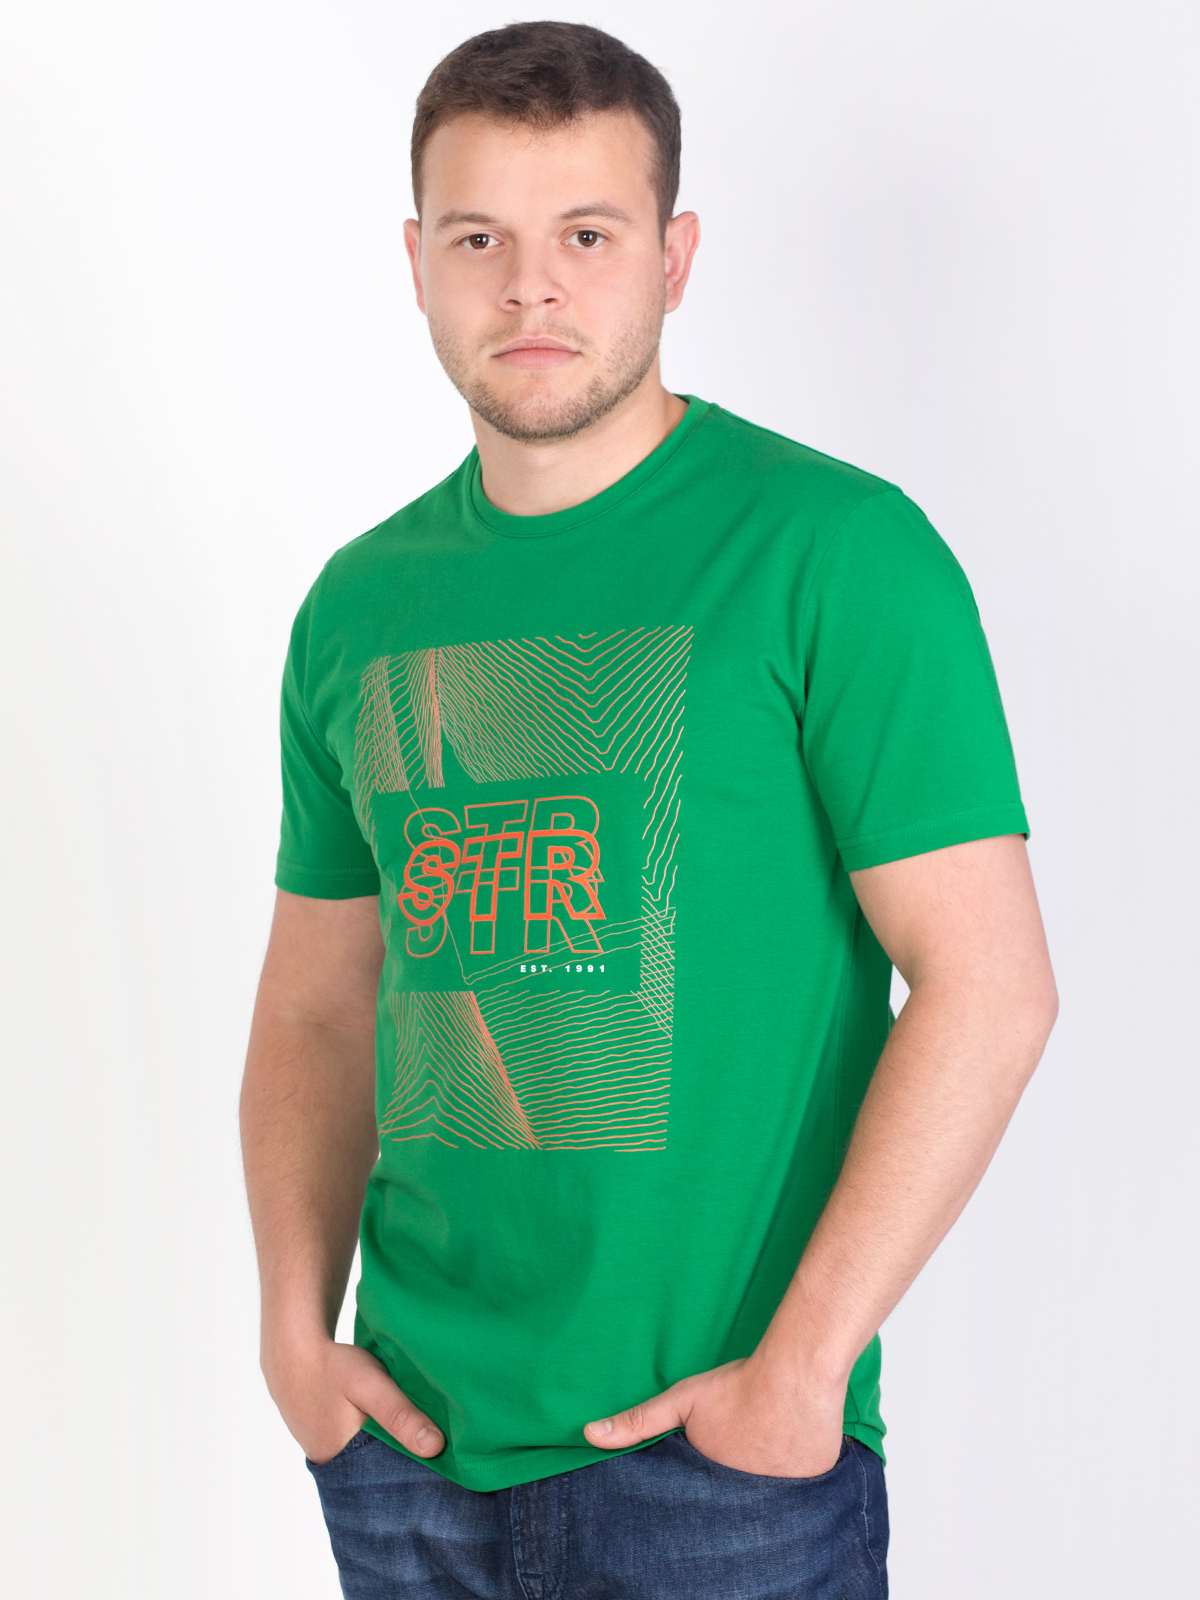 Tshirt in bright green with a print - 96429 € 16.31 img3